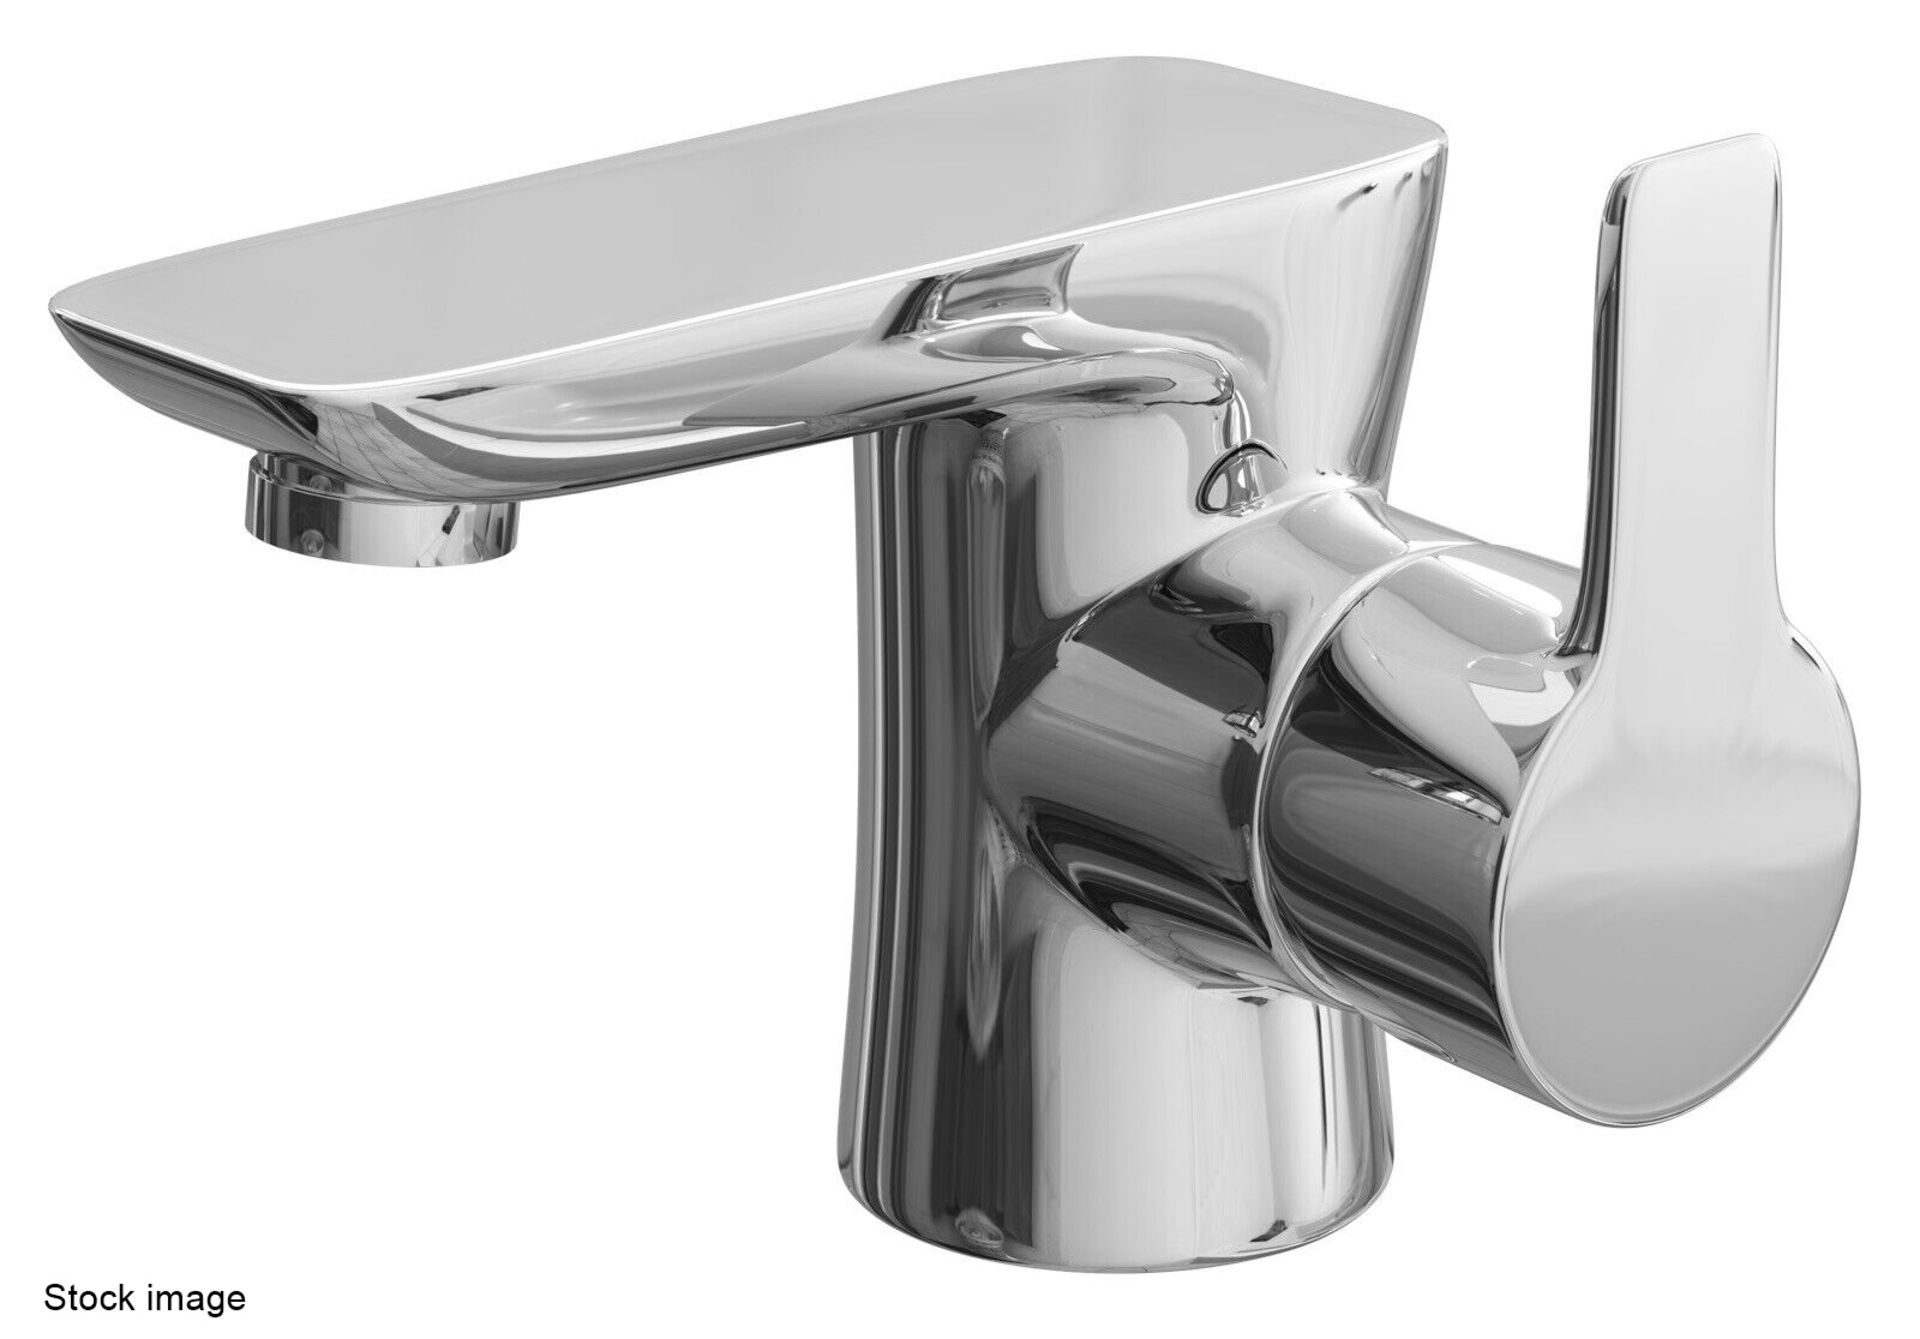 1 x CASSELLIE 'Pedras' Mono Basin Mixer With Push Waste In Chrome - Ref: PED001 - RRP £153.99 - - Image 3 of 3